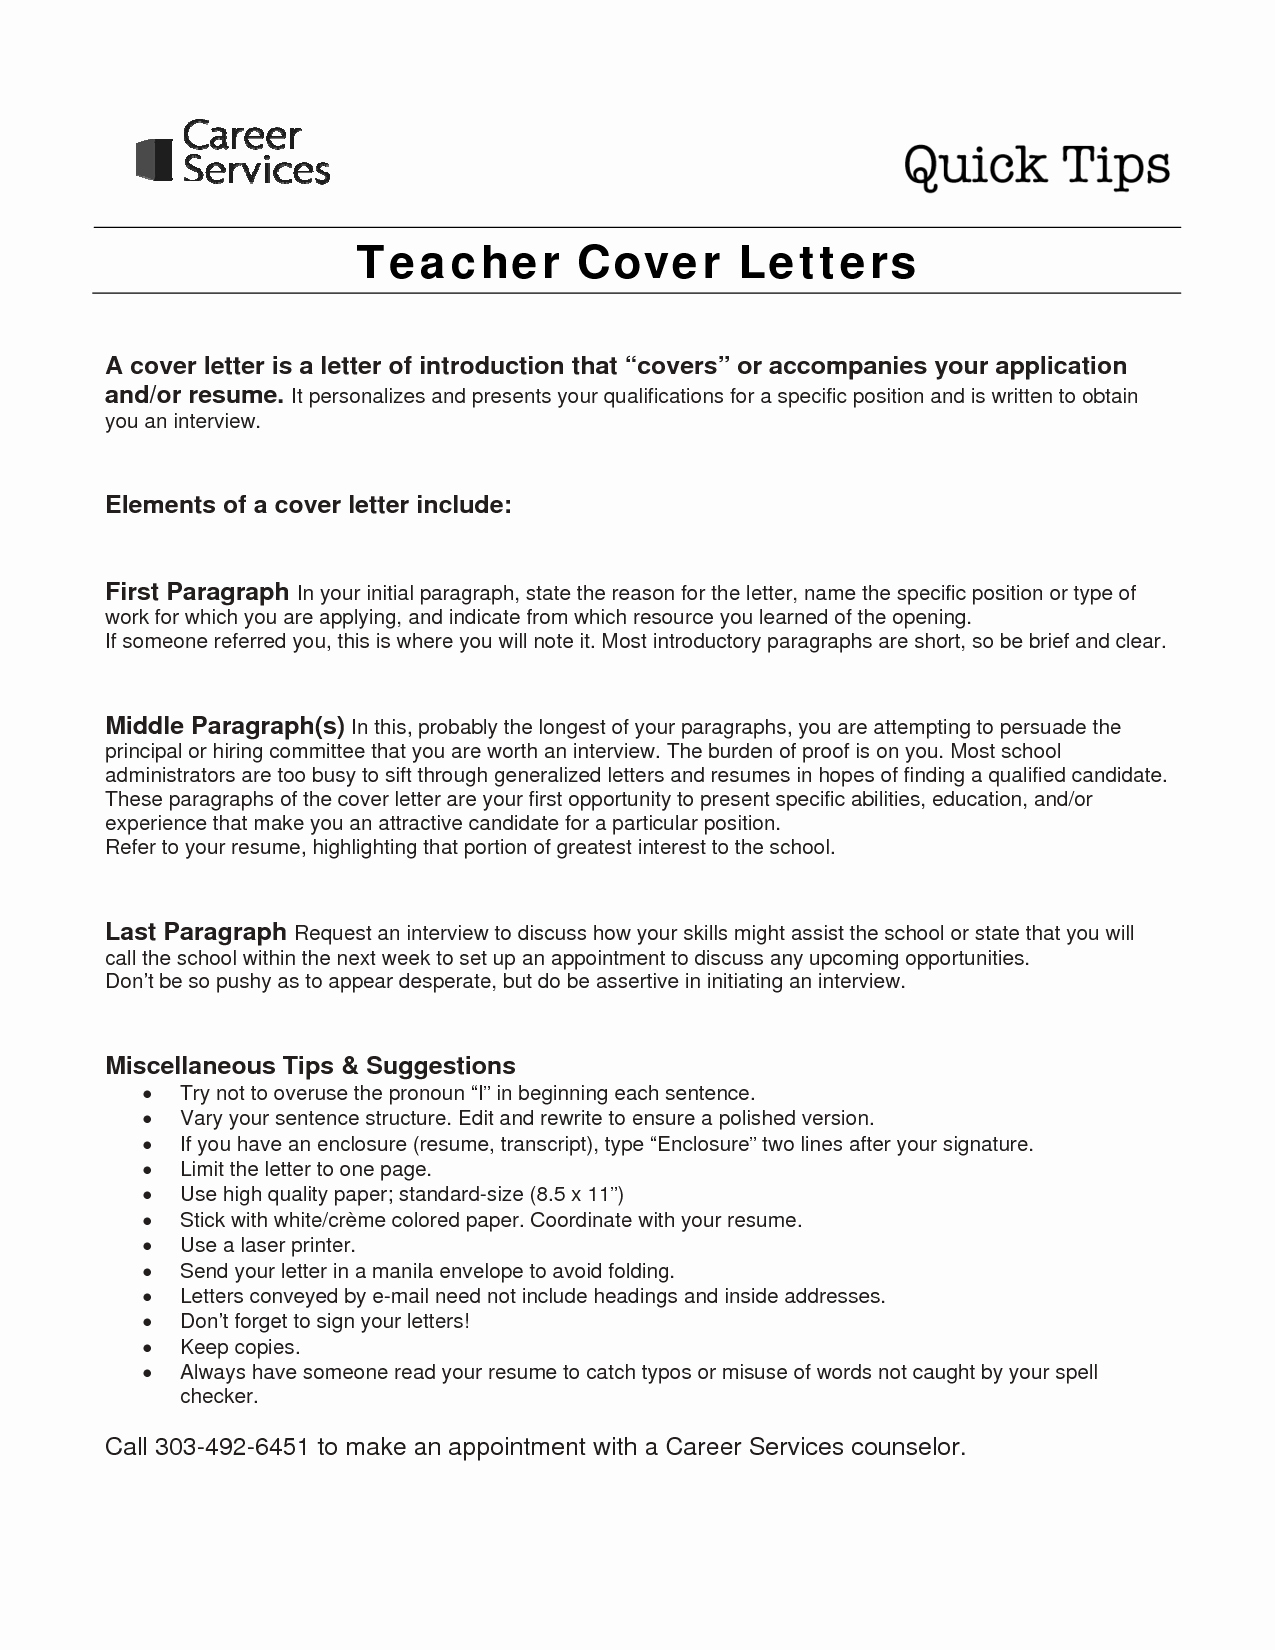 Work Experience Application Letter format